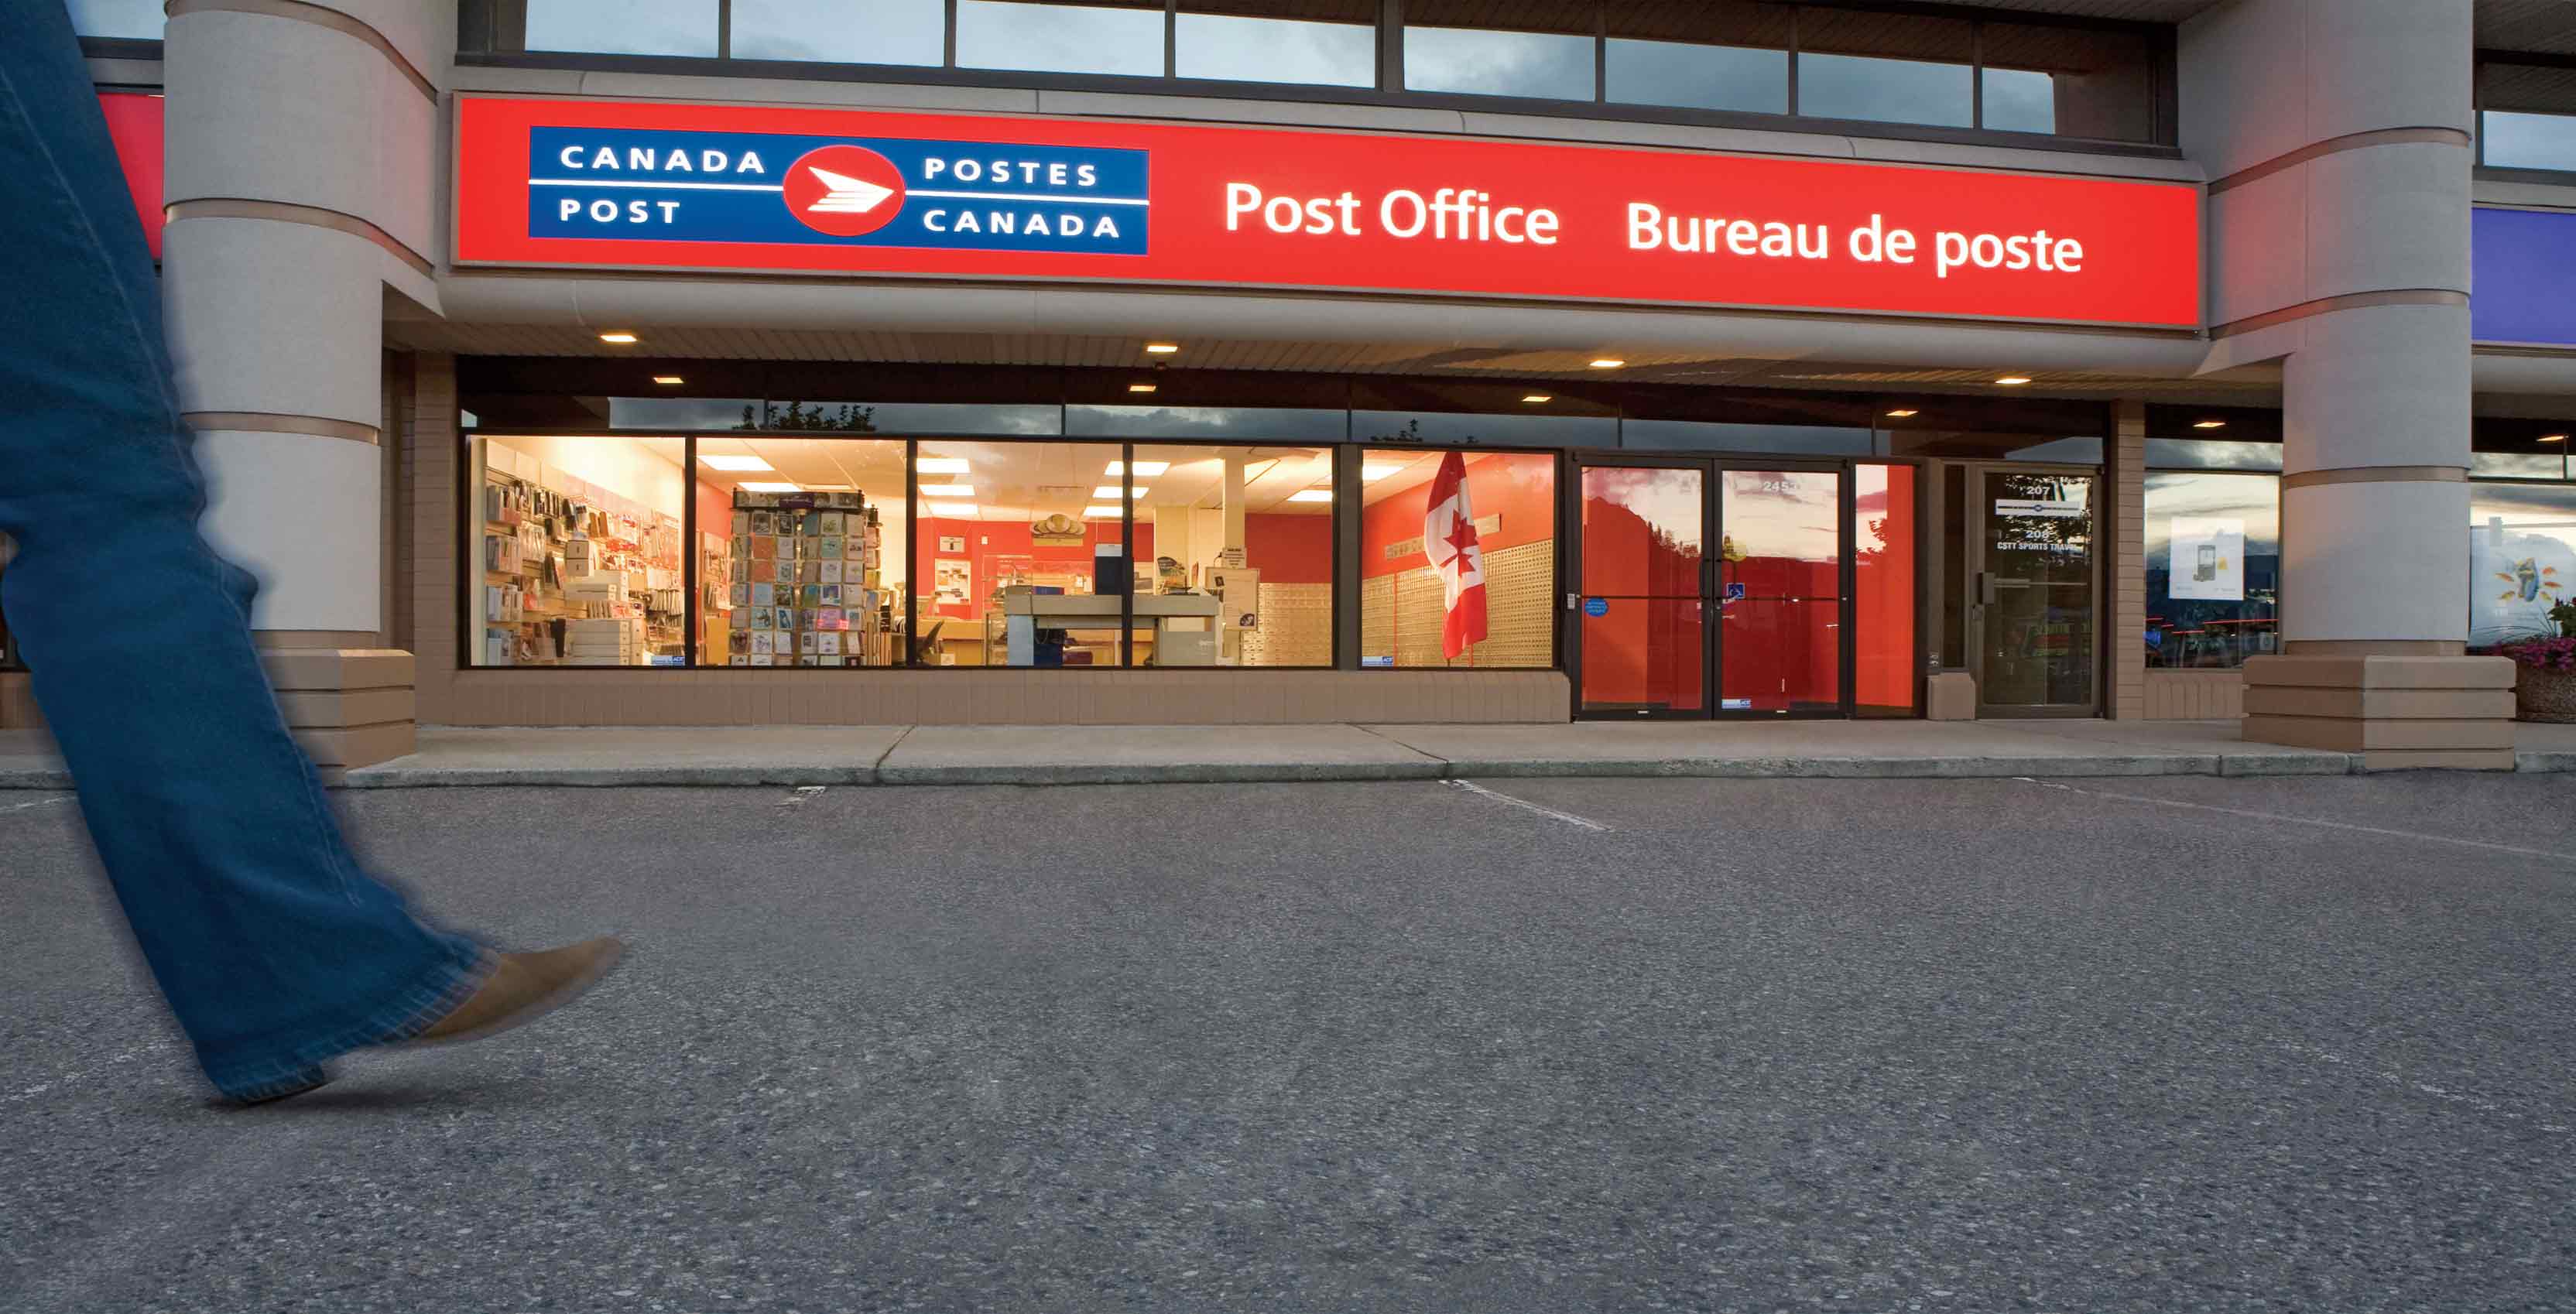 Image showing a Canada Post office